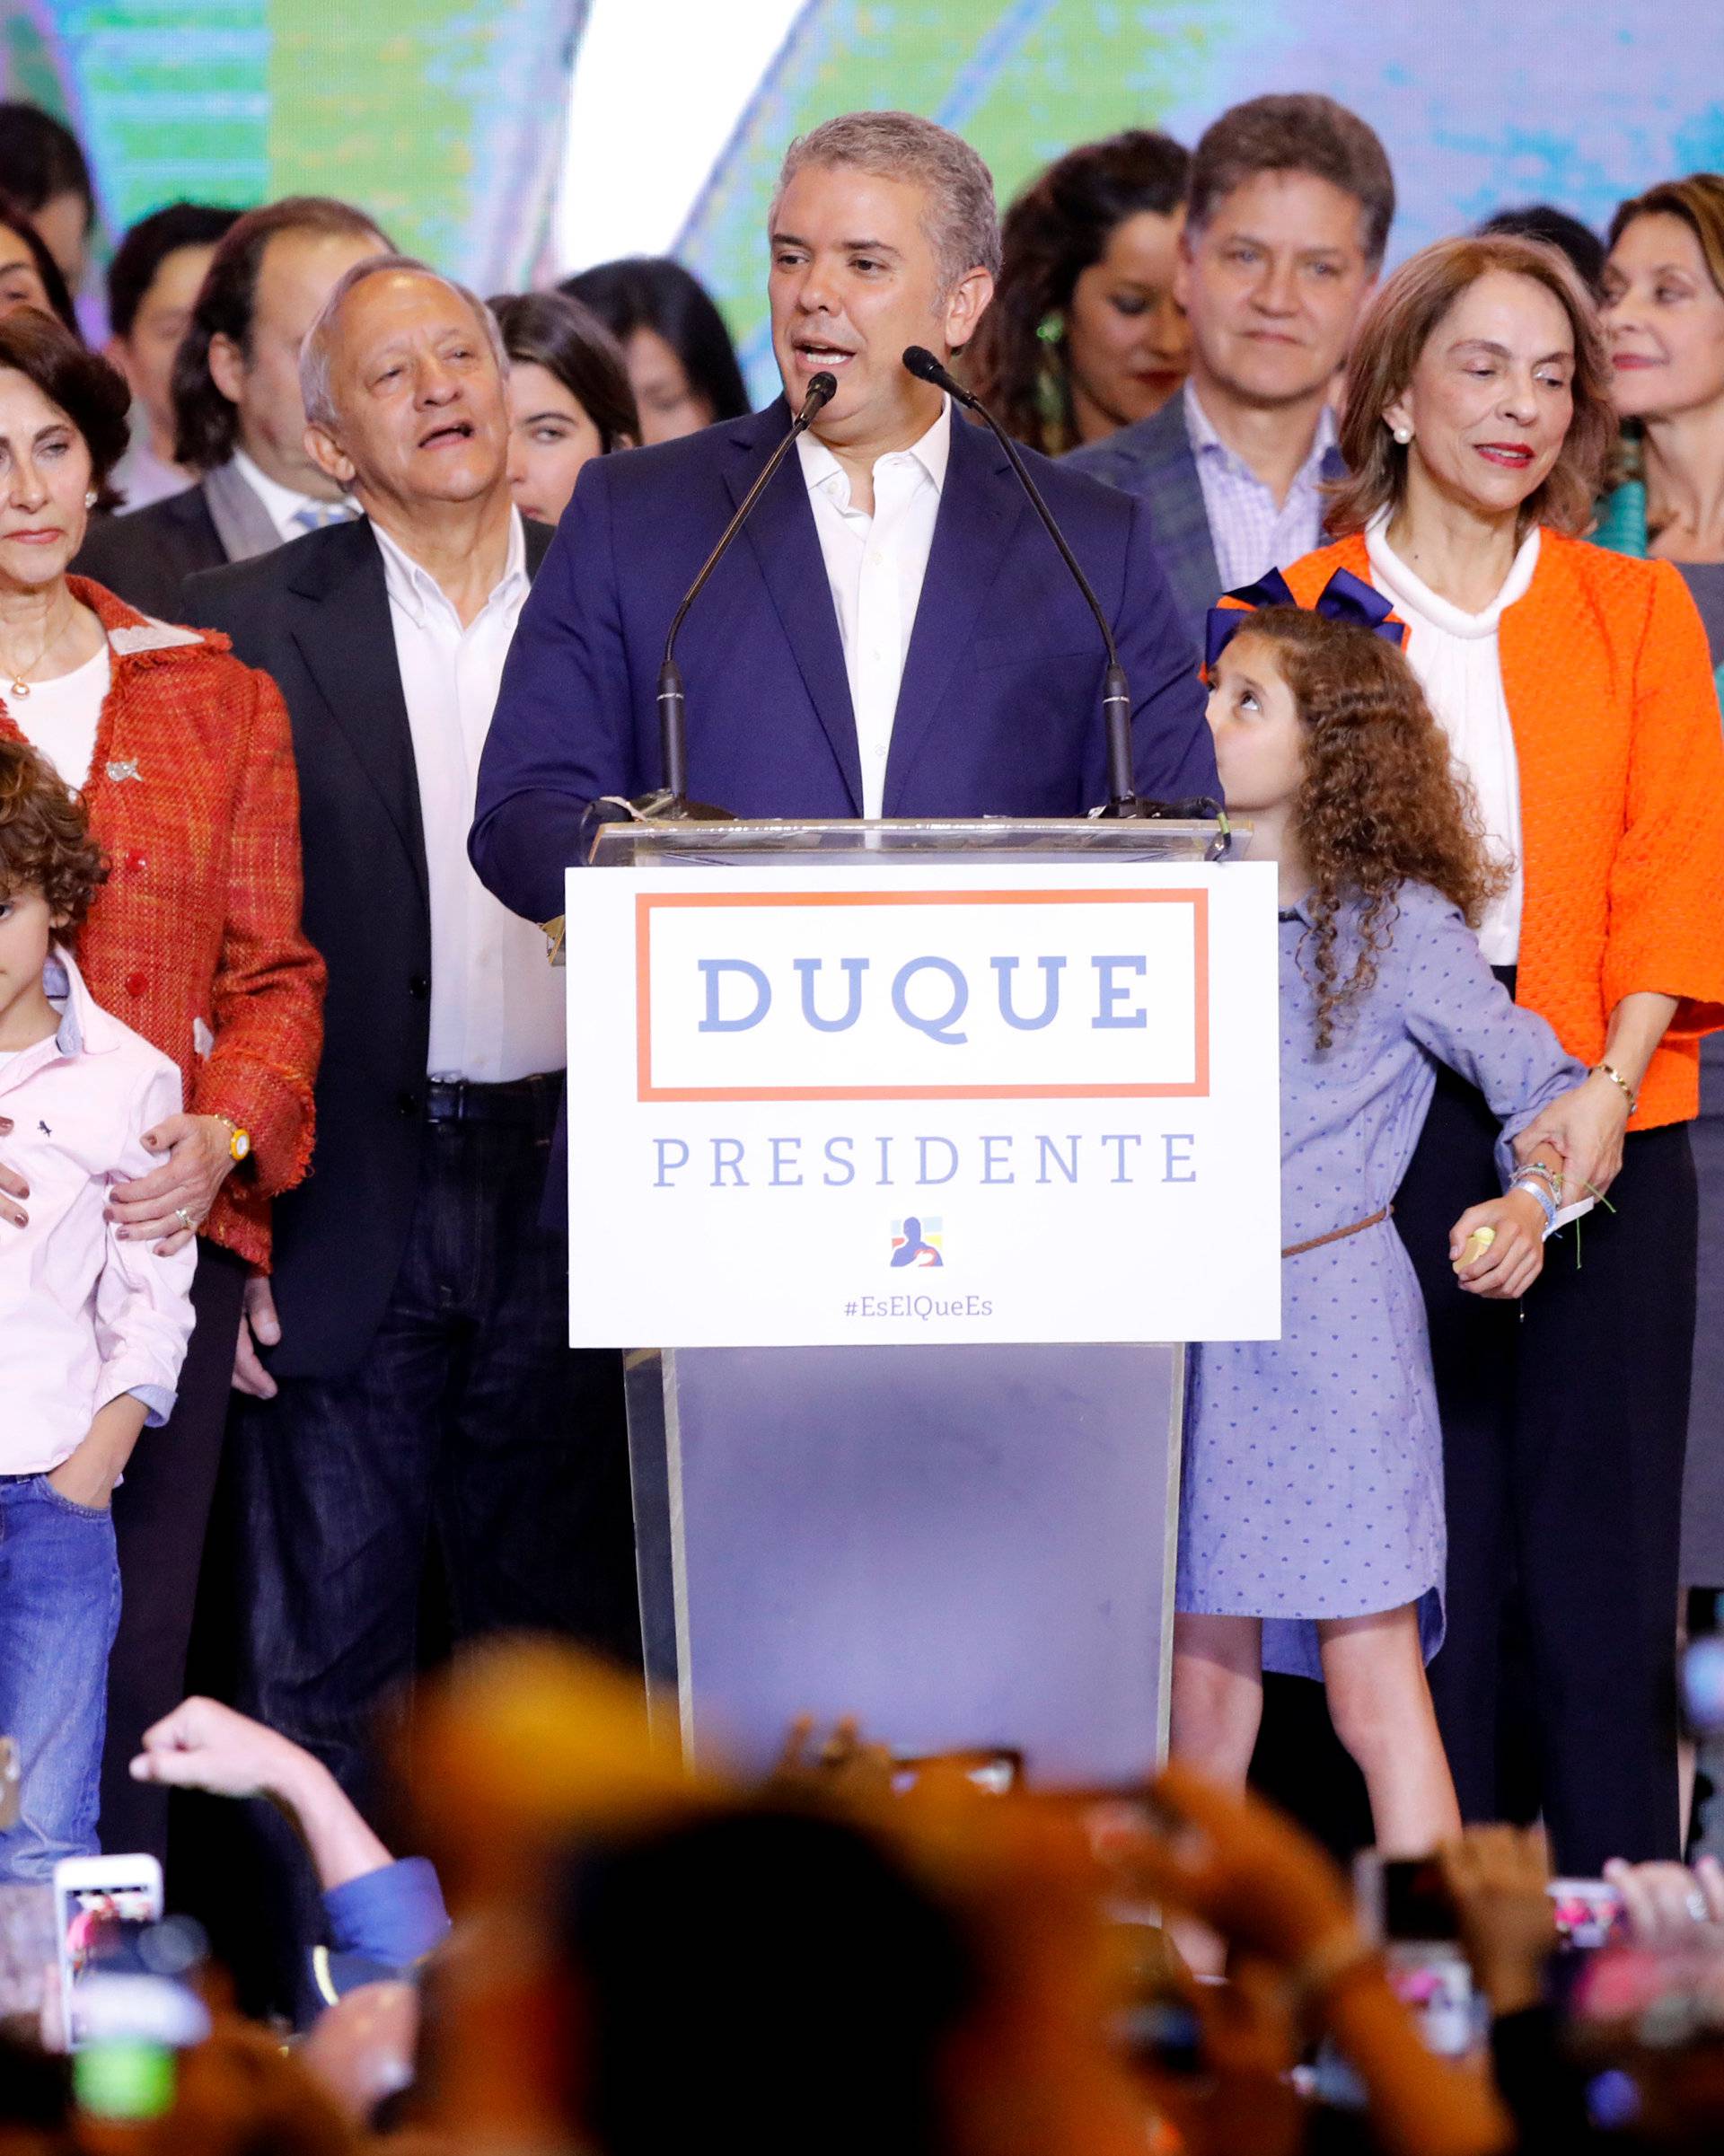 Presidential candidate Duque speaks to supporters after he won the presidential election in Bogota